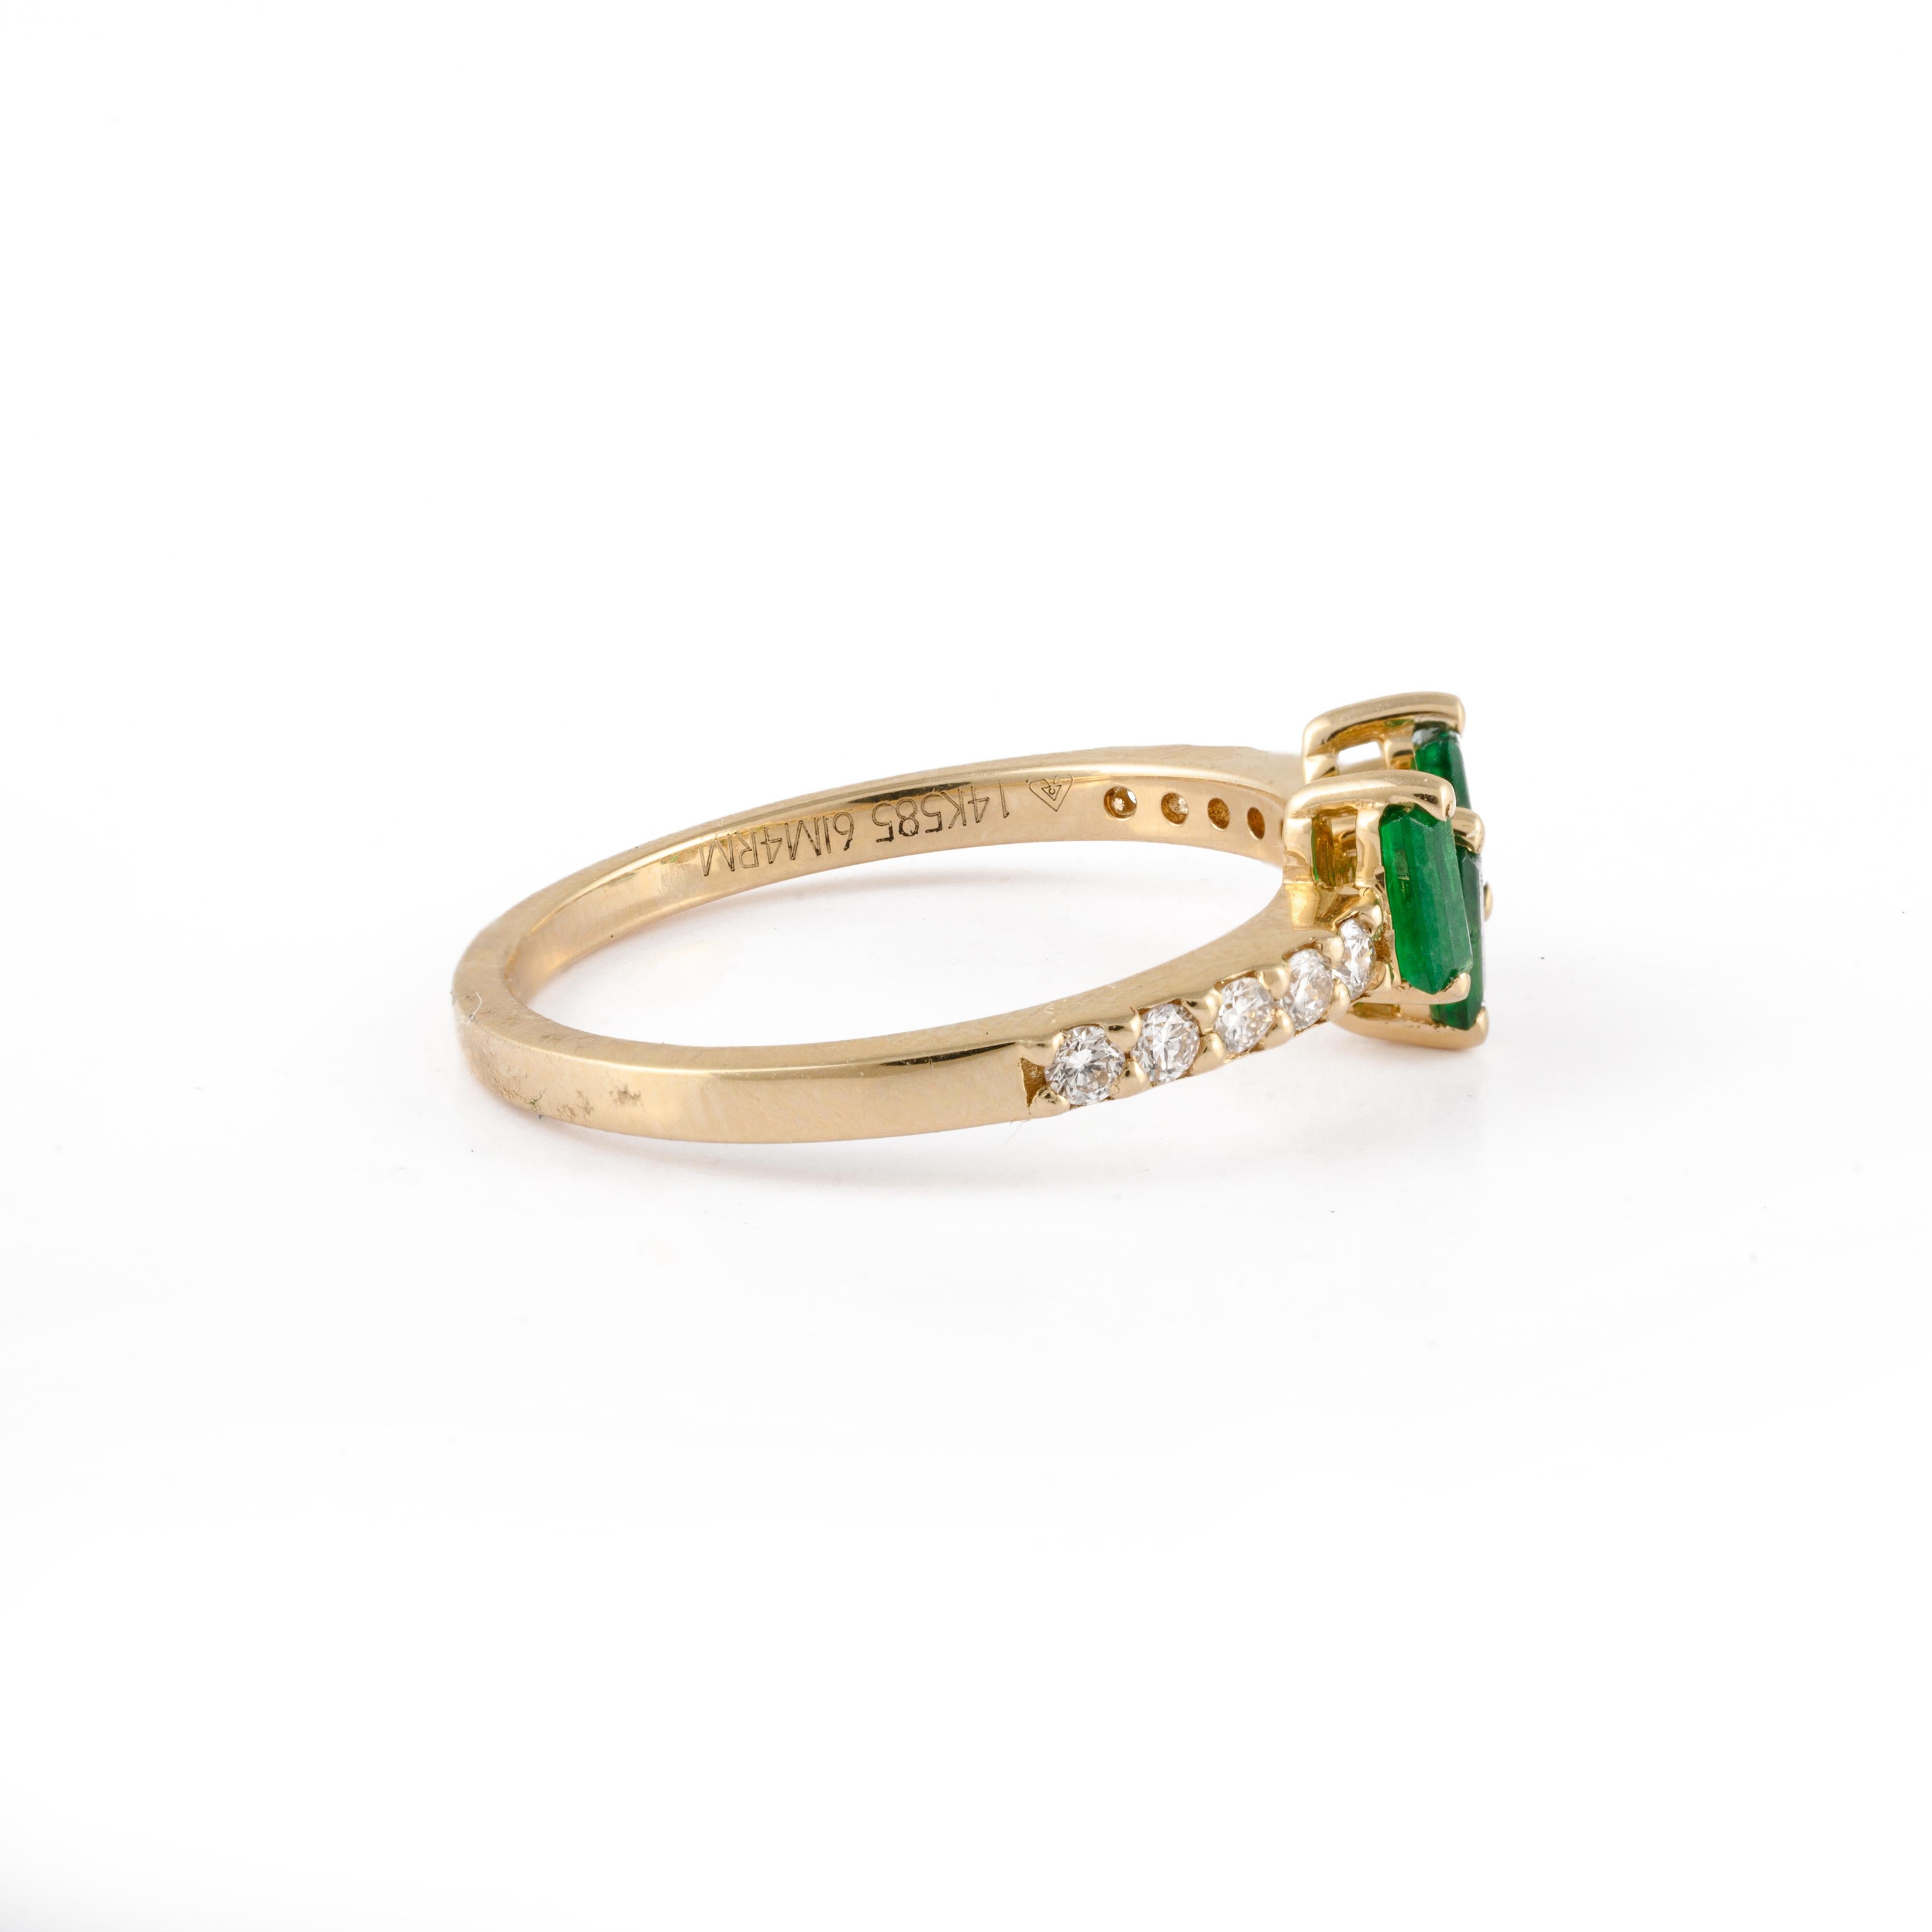 For Sale:  Solid 14 Karat Yellow Gold Emerald and Diamond Minimalist Ring Gift 5